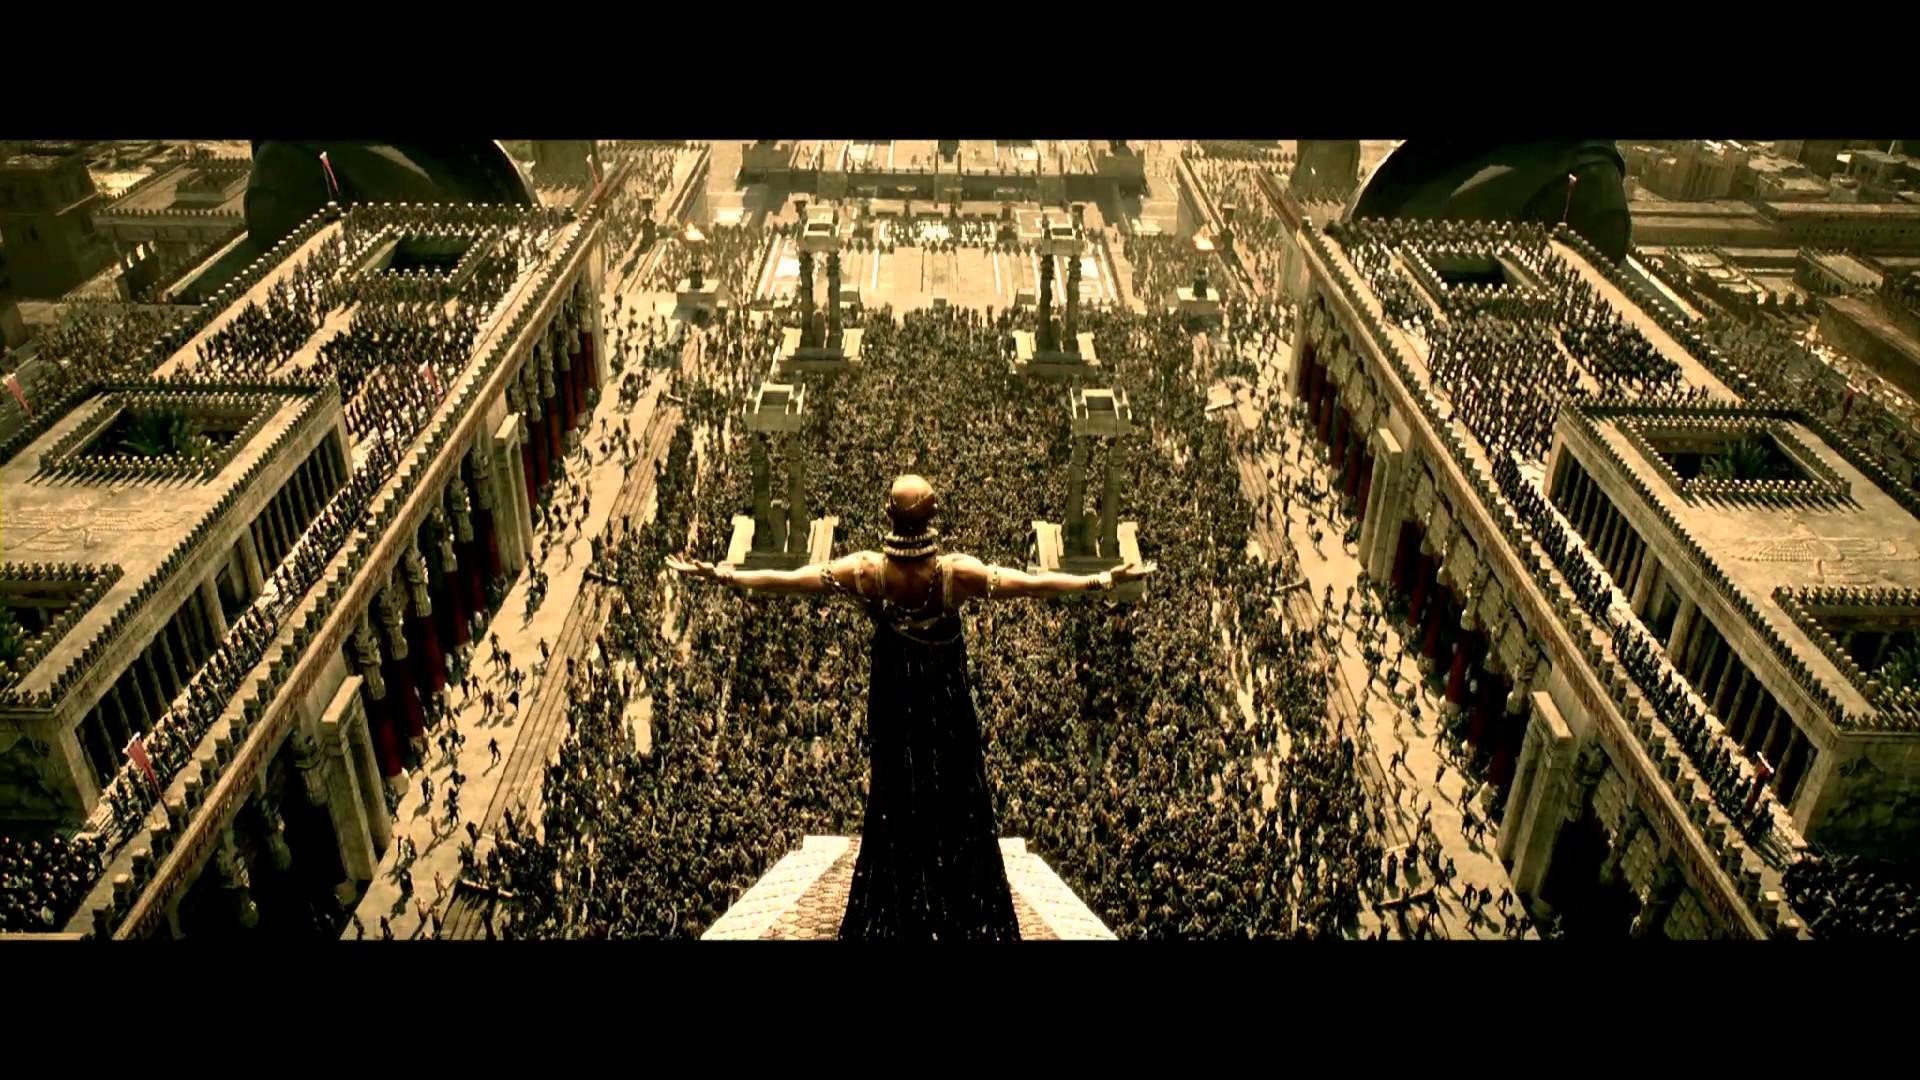 1920x1080 Xerxes 300 Rise of an Empire wallpapers (41 Wallpapers)